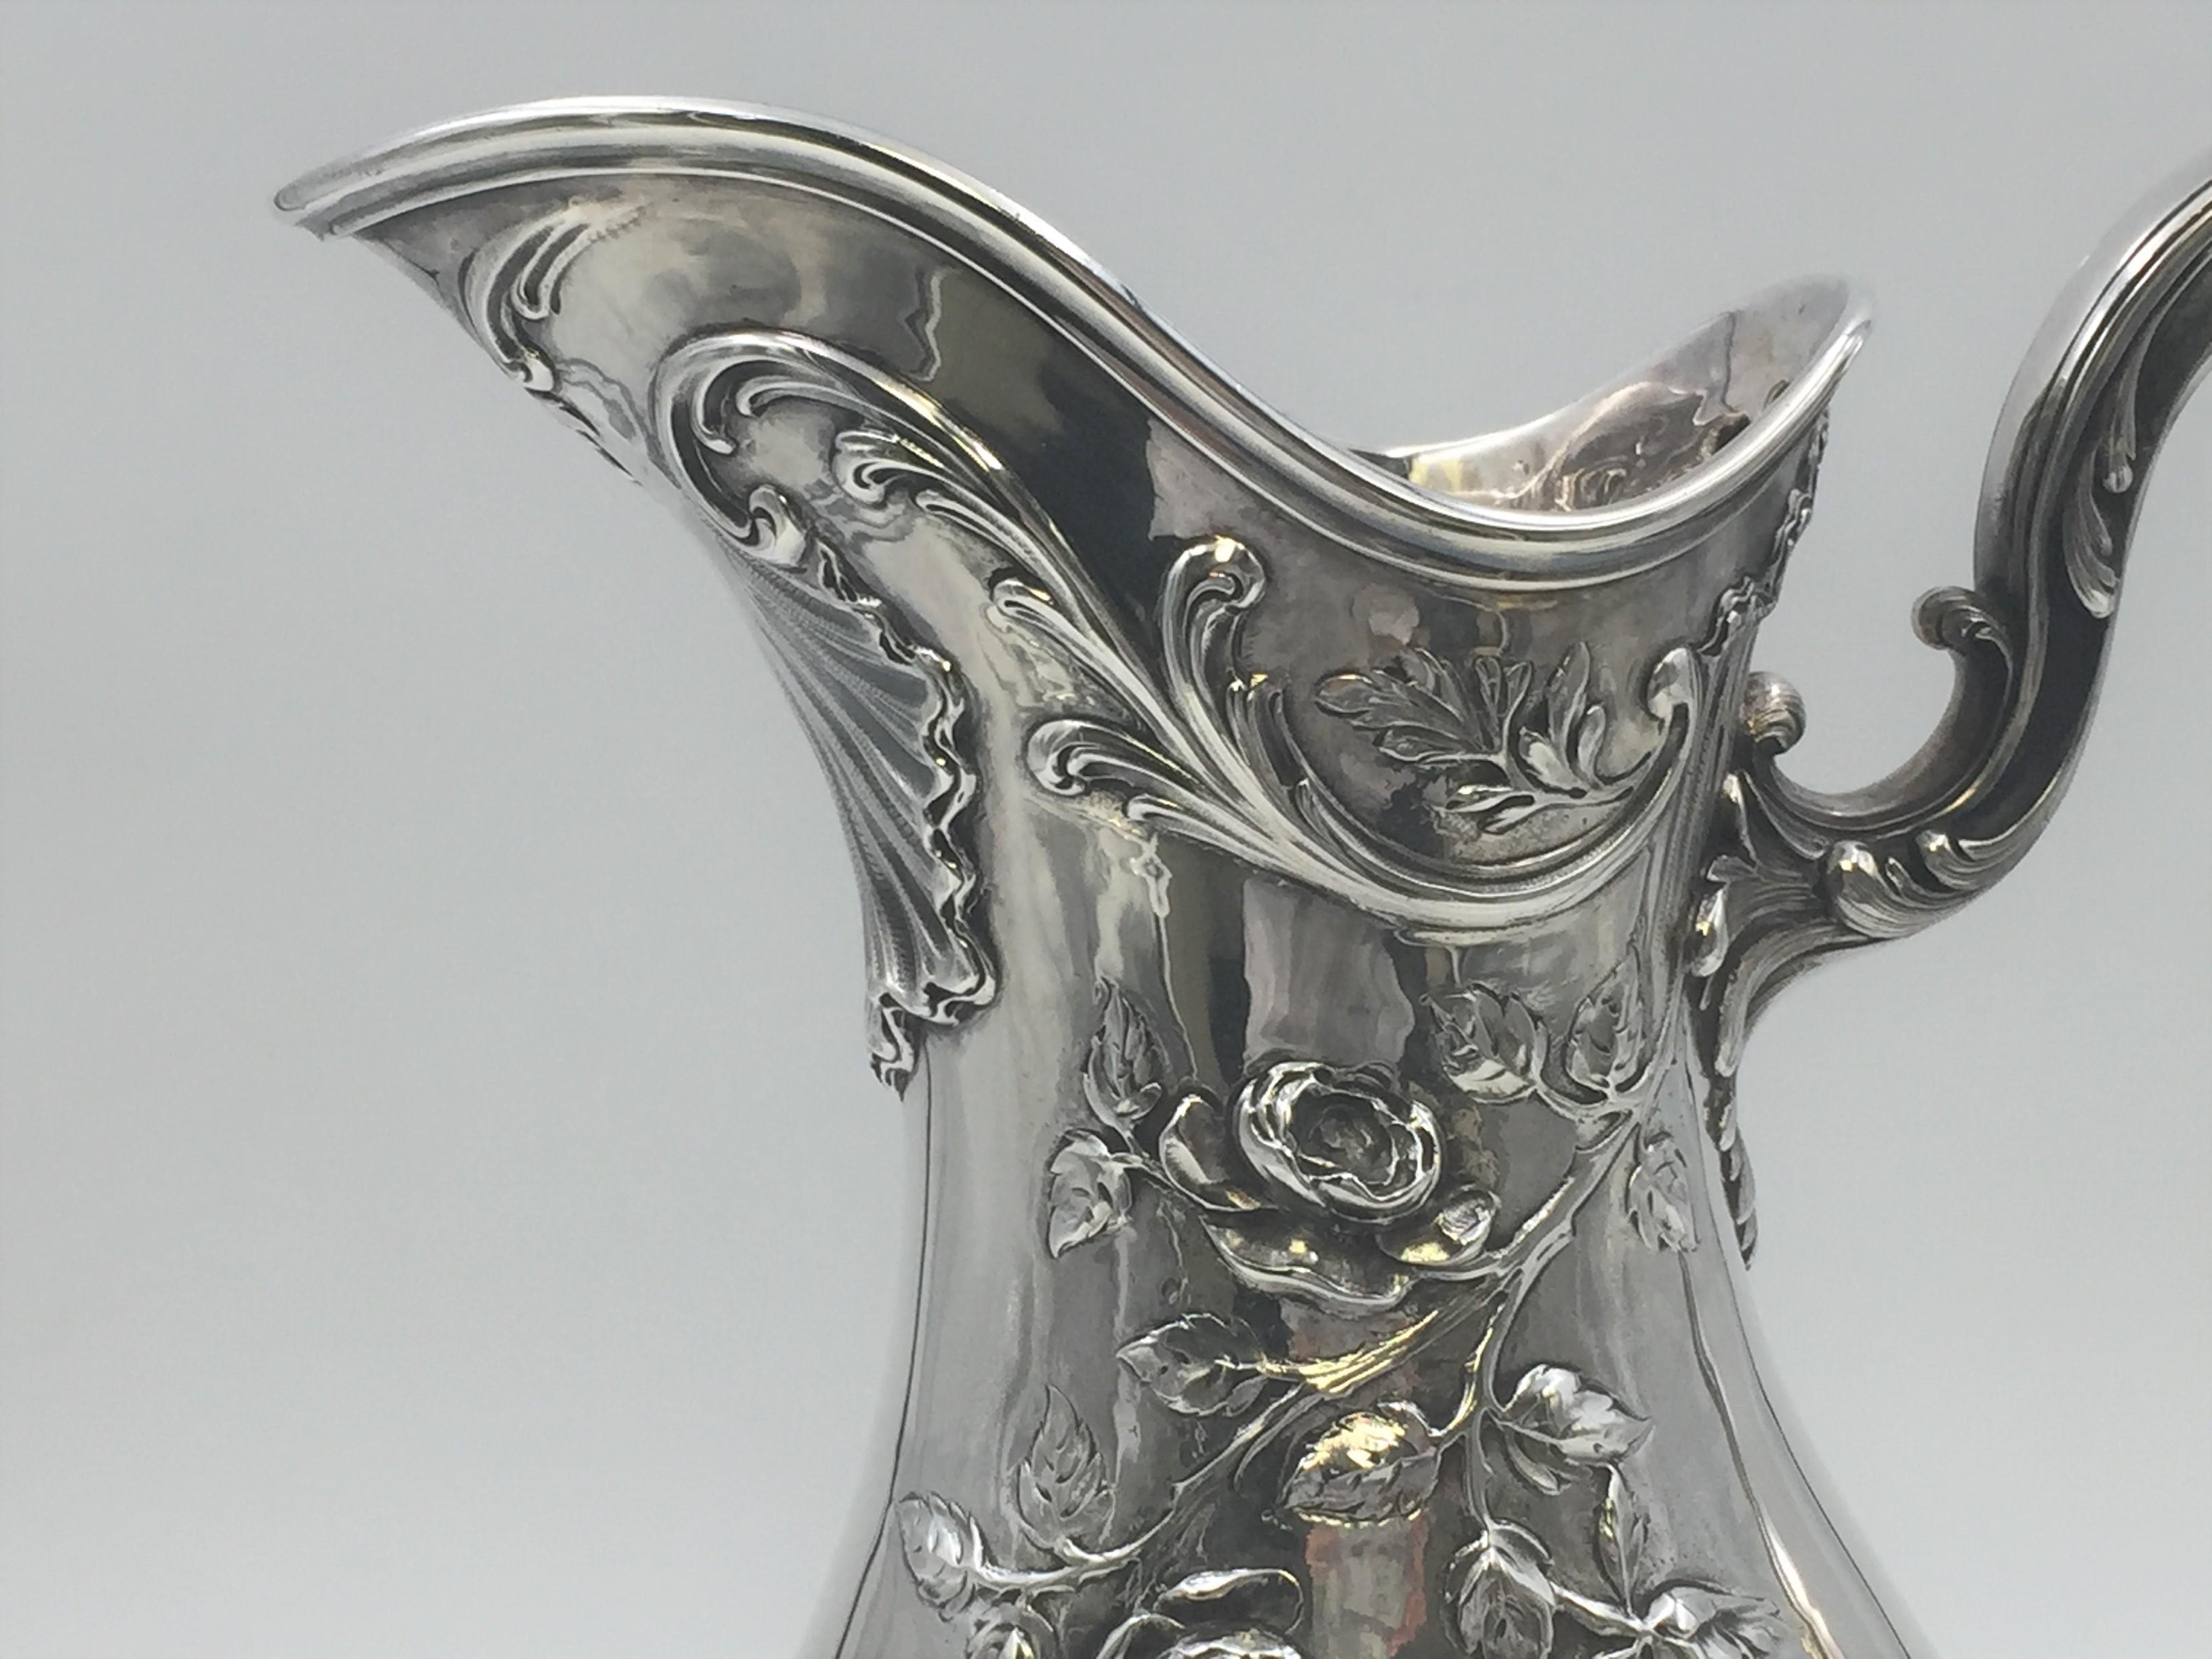 Late 19th/ early 20th century French 0.950 (higher purity than sterling) silver ewer / pitcher by renowned silversmith Emile Puiforcat with exquisite floral and geometric patterns. Measuring 14 1/4'' in height and 10'' from handle to spout and